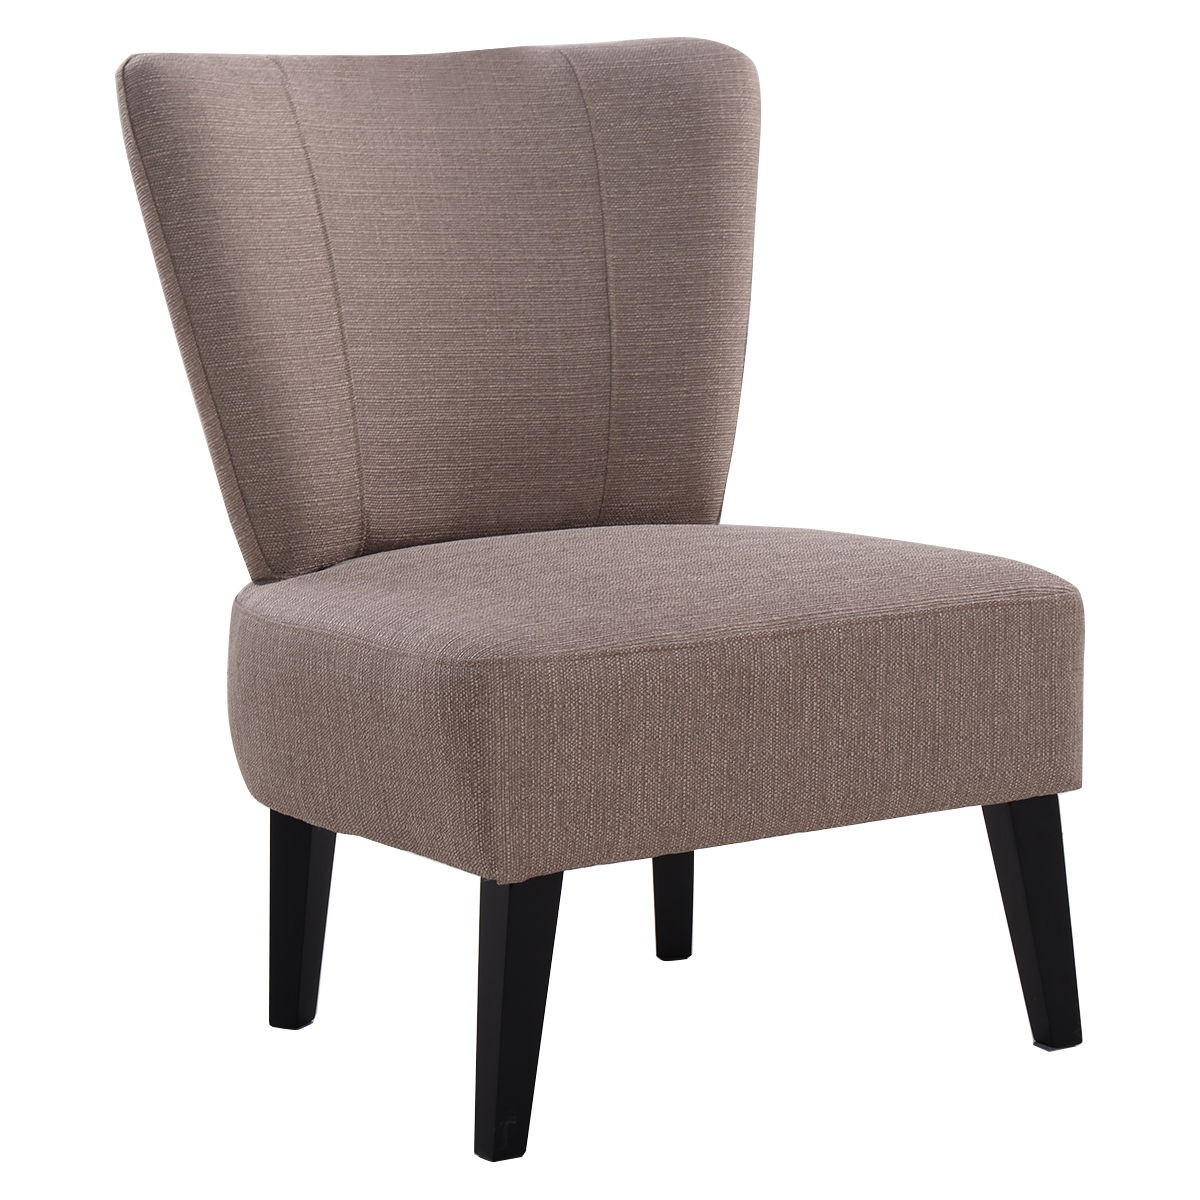 Armless Living Room Chairs
 Armless Accent Chair Upholstered Seat Dining Chair Living